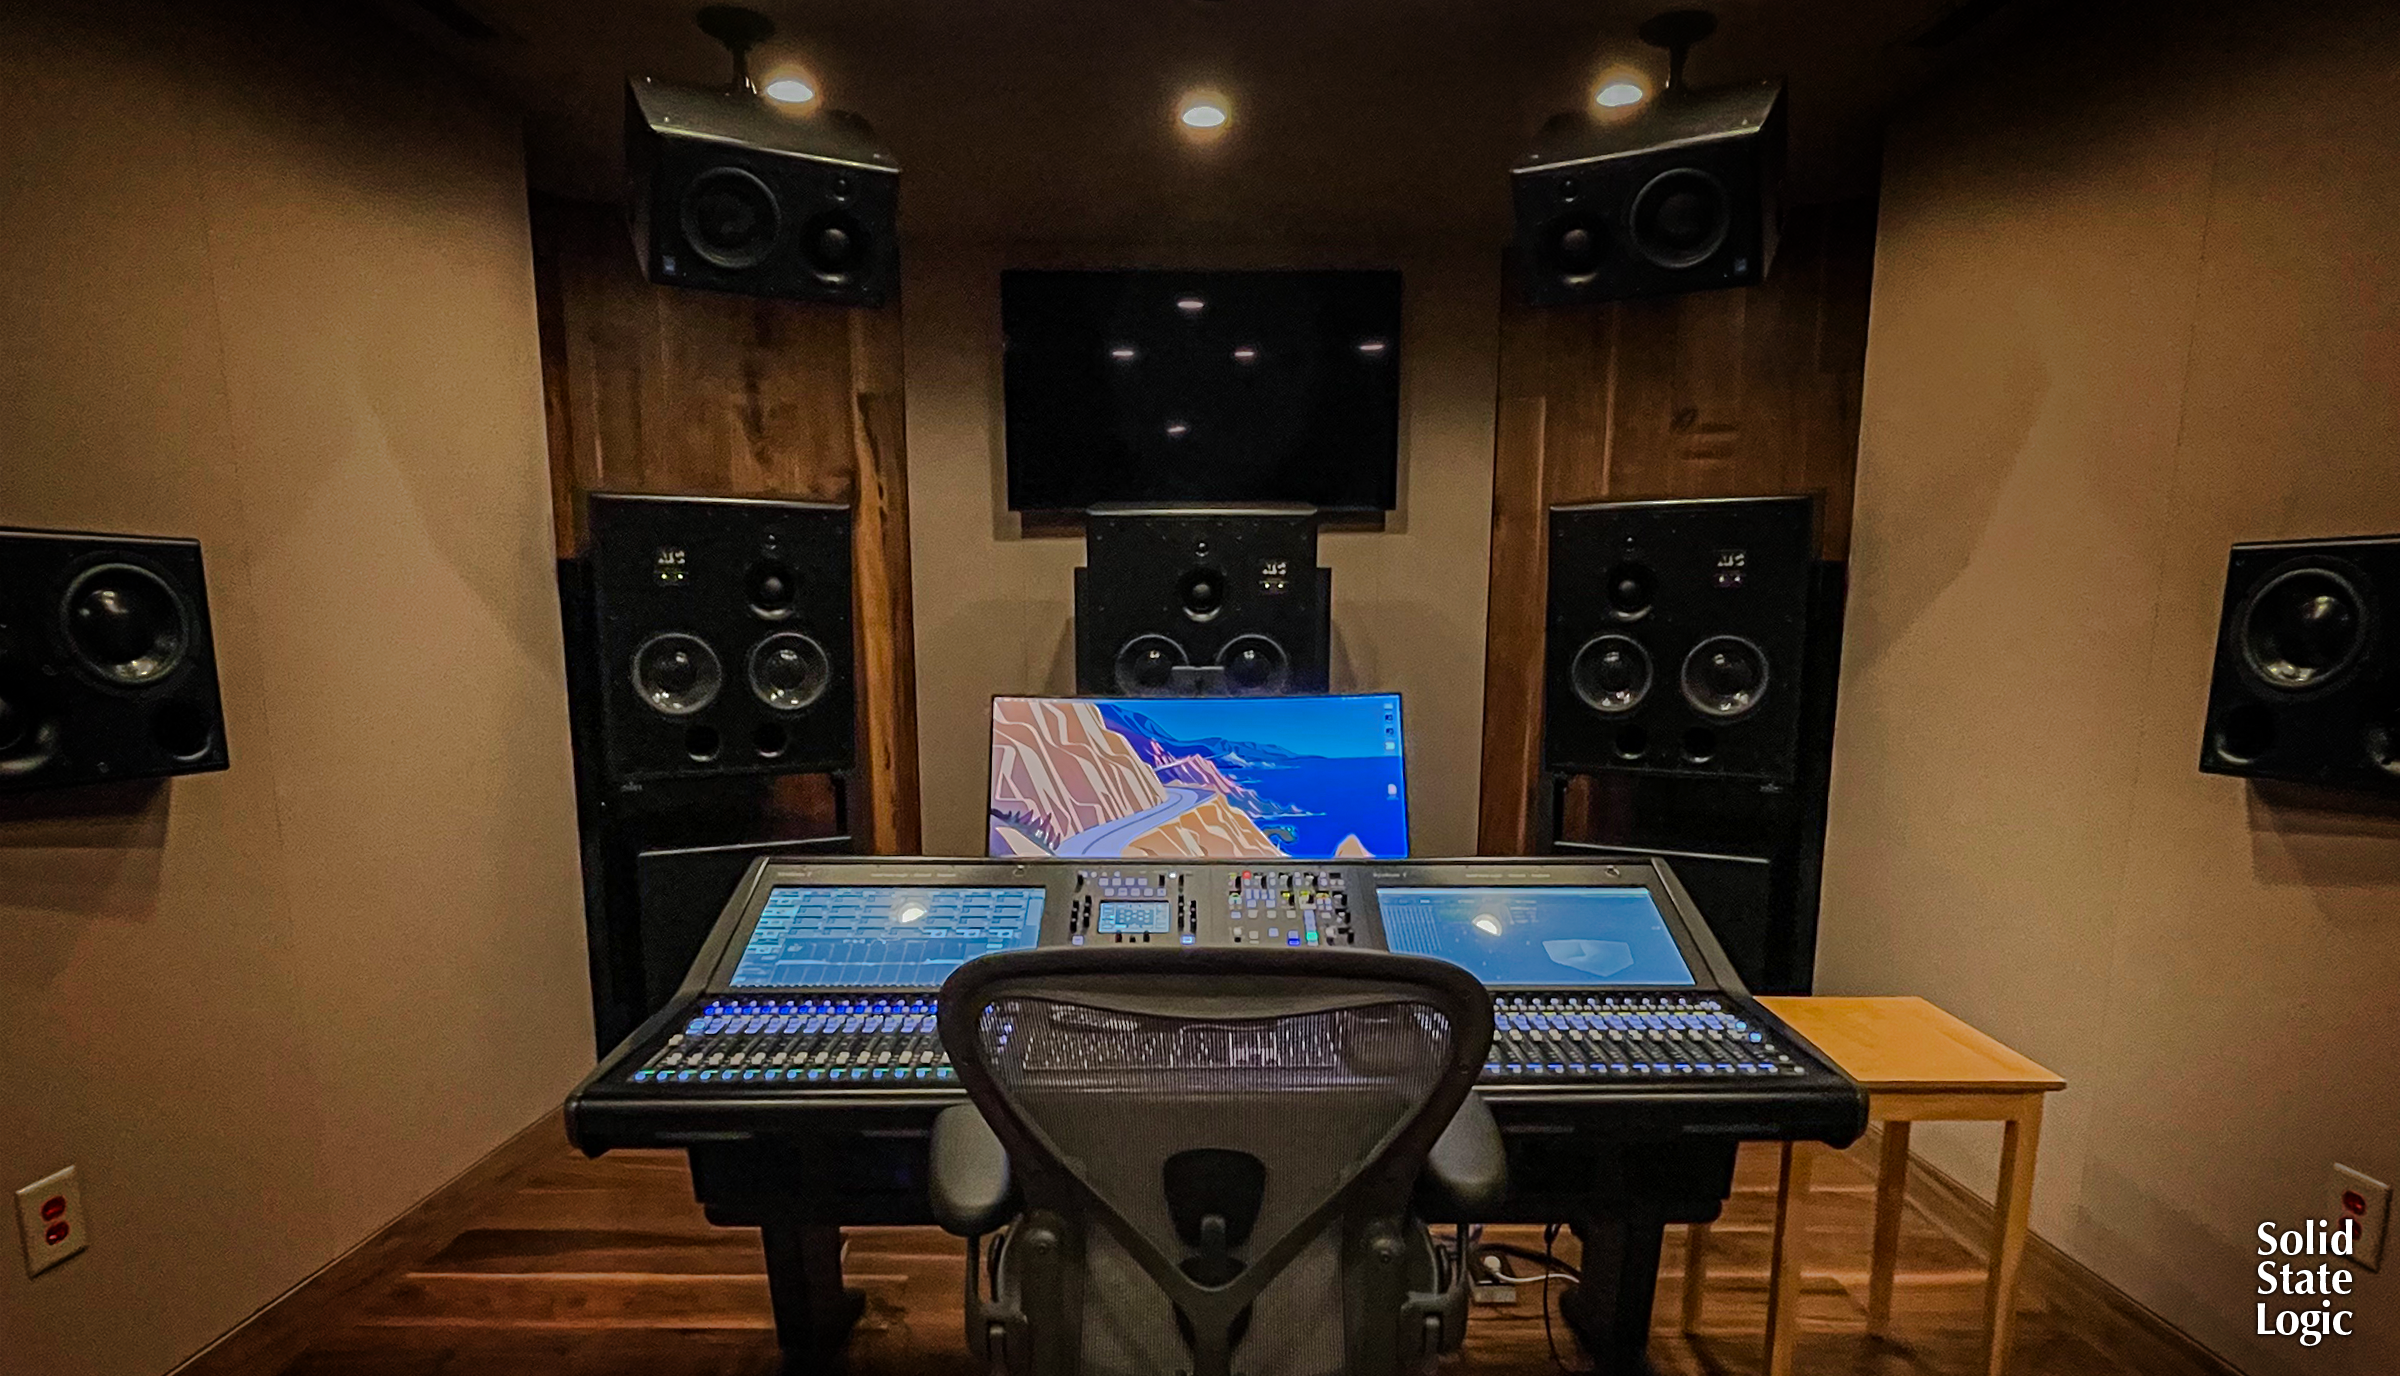 Dolby Atmos in the Studio